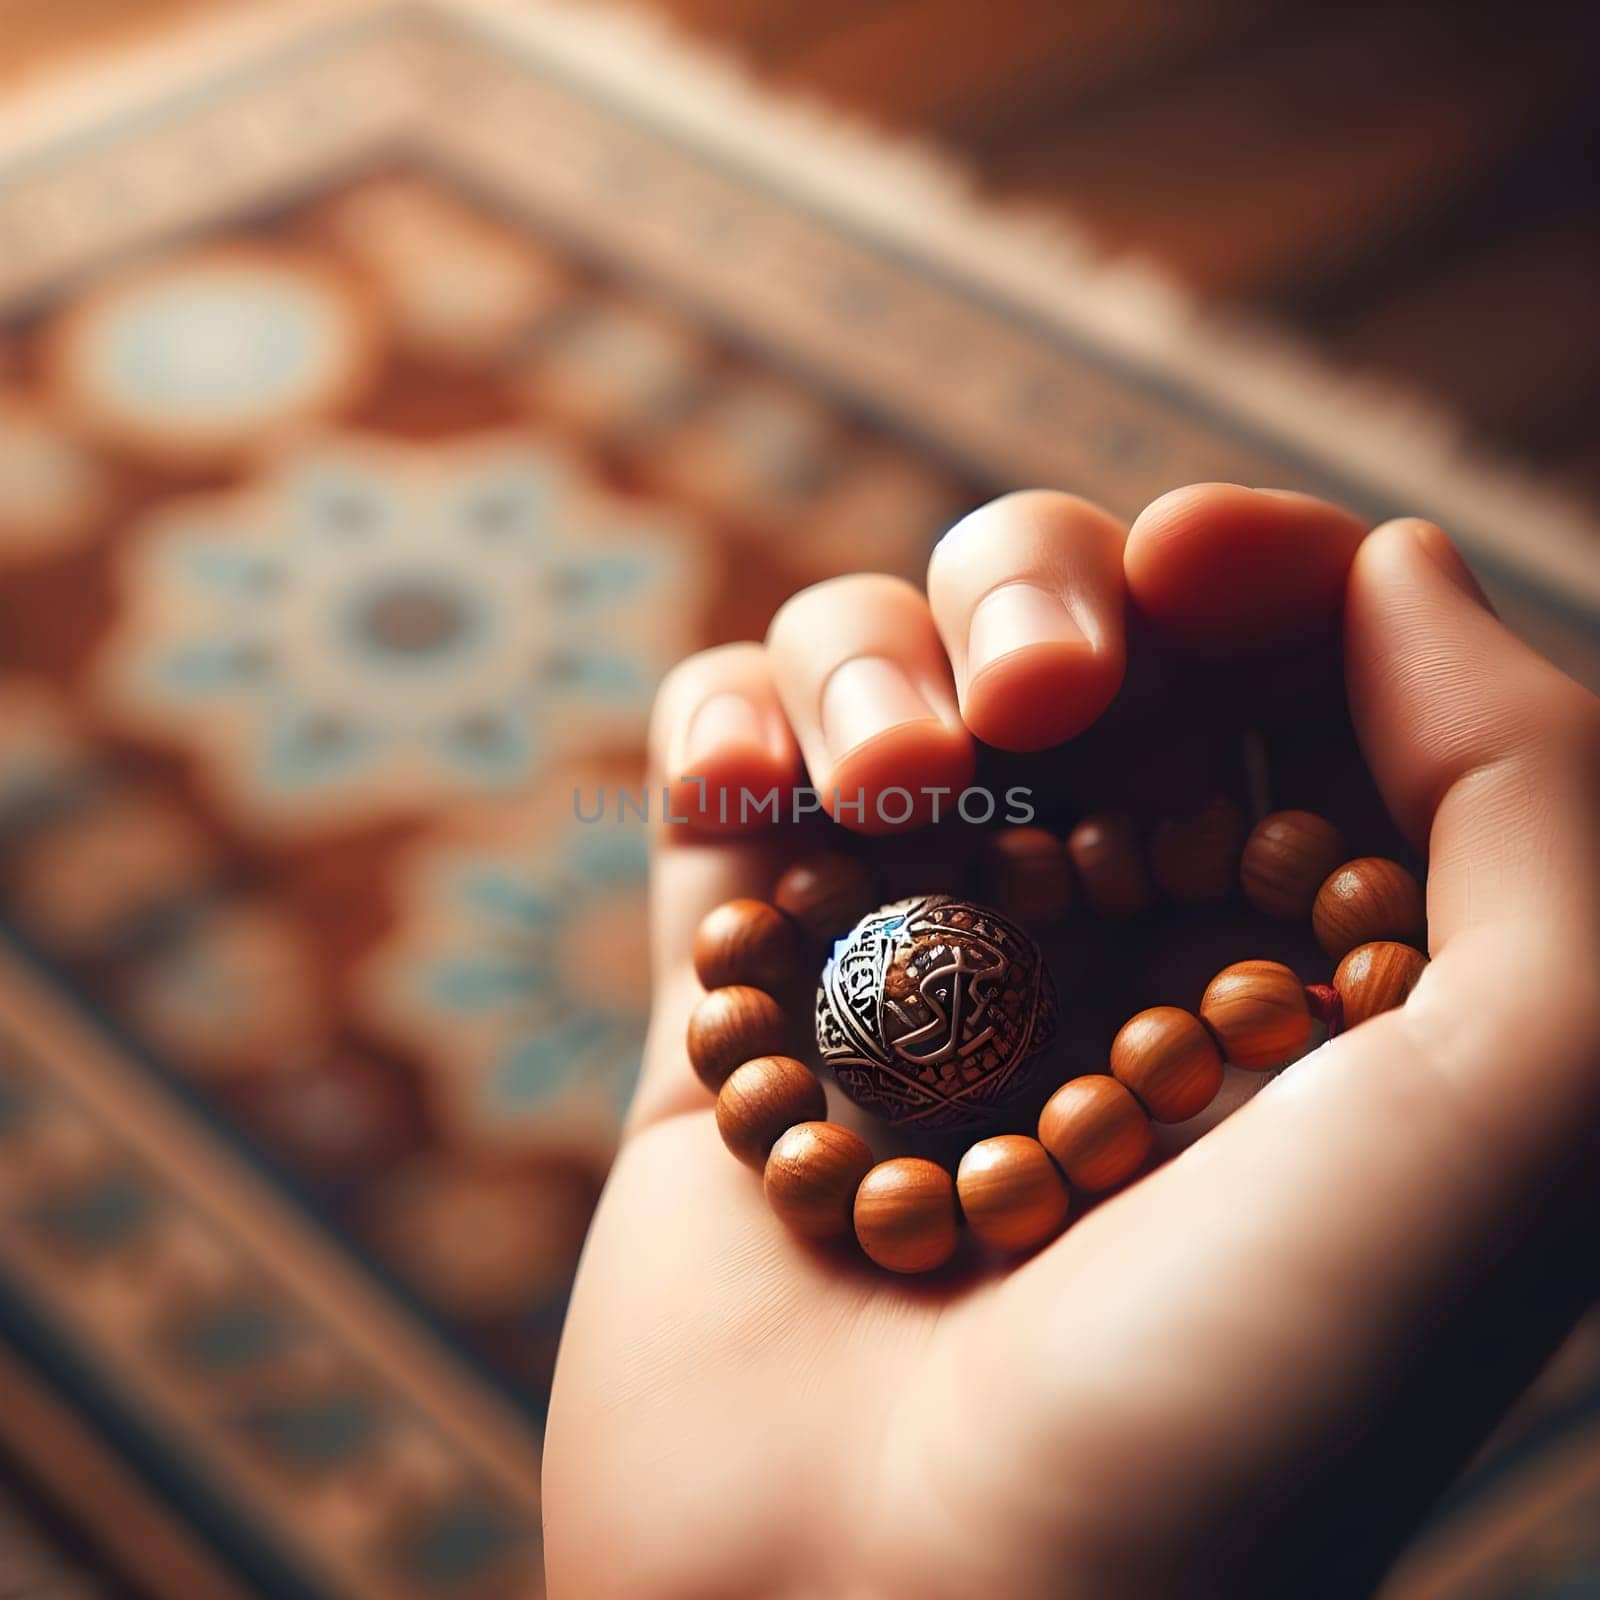 A close up of a beautifully crafted prayer bead held gently between fingers, with a soft focus on a prayer rug in the background. Happy ramadan, ramadhan, ramazan by Designlab